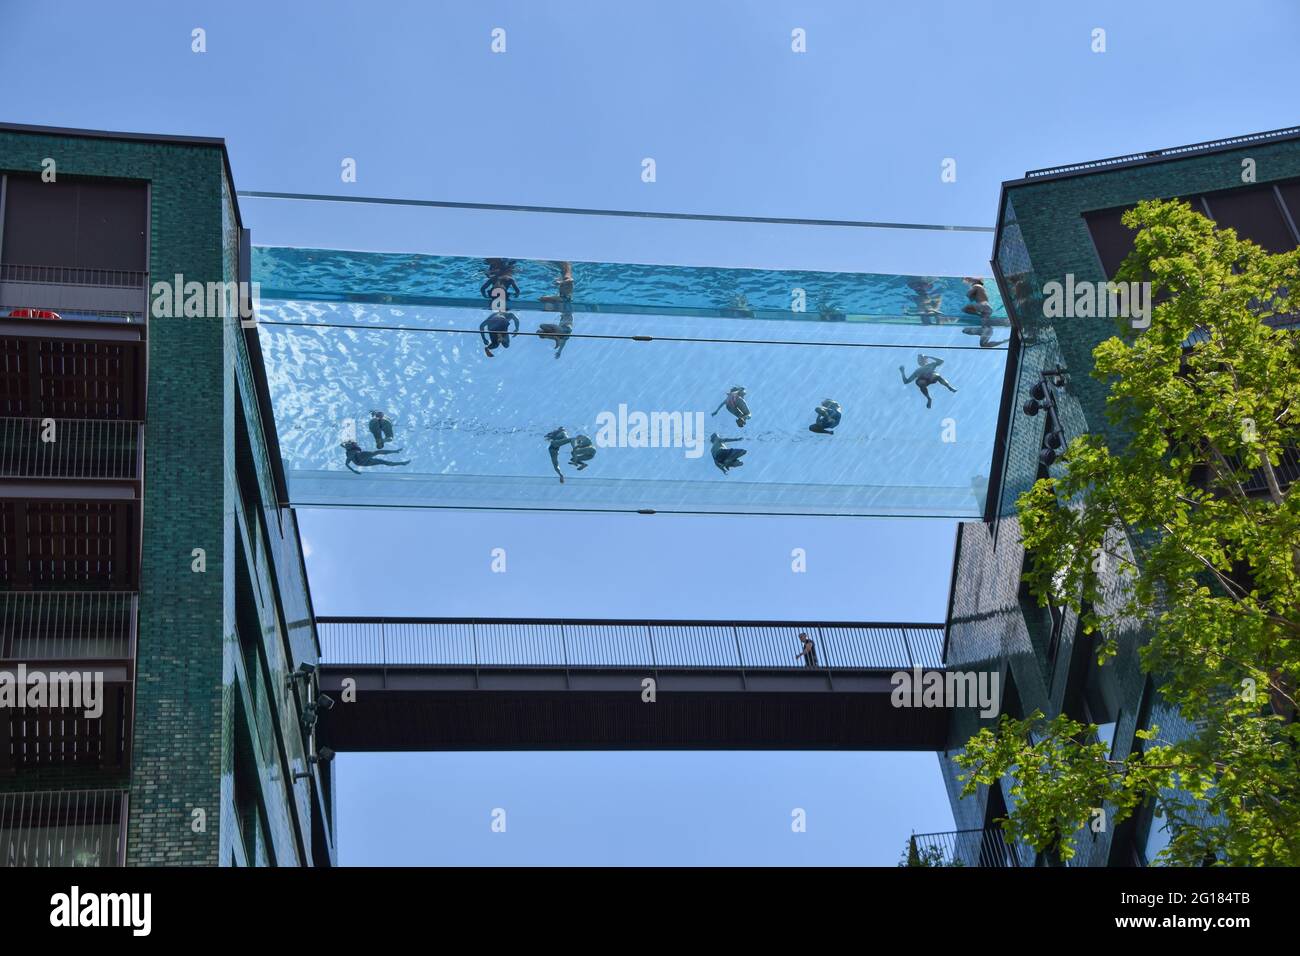 London Uk 05th June 21 People Are Seen Swimming In A Newly Opened Sky Pool In London A Completely Transparent Swimming Pool Suspended 35 Meters Above Ground Between Two Apartment Buildings Next